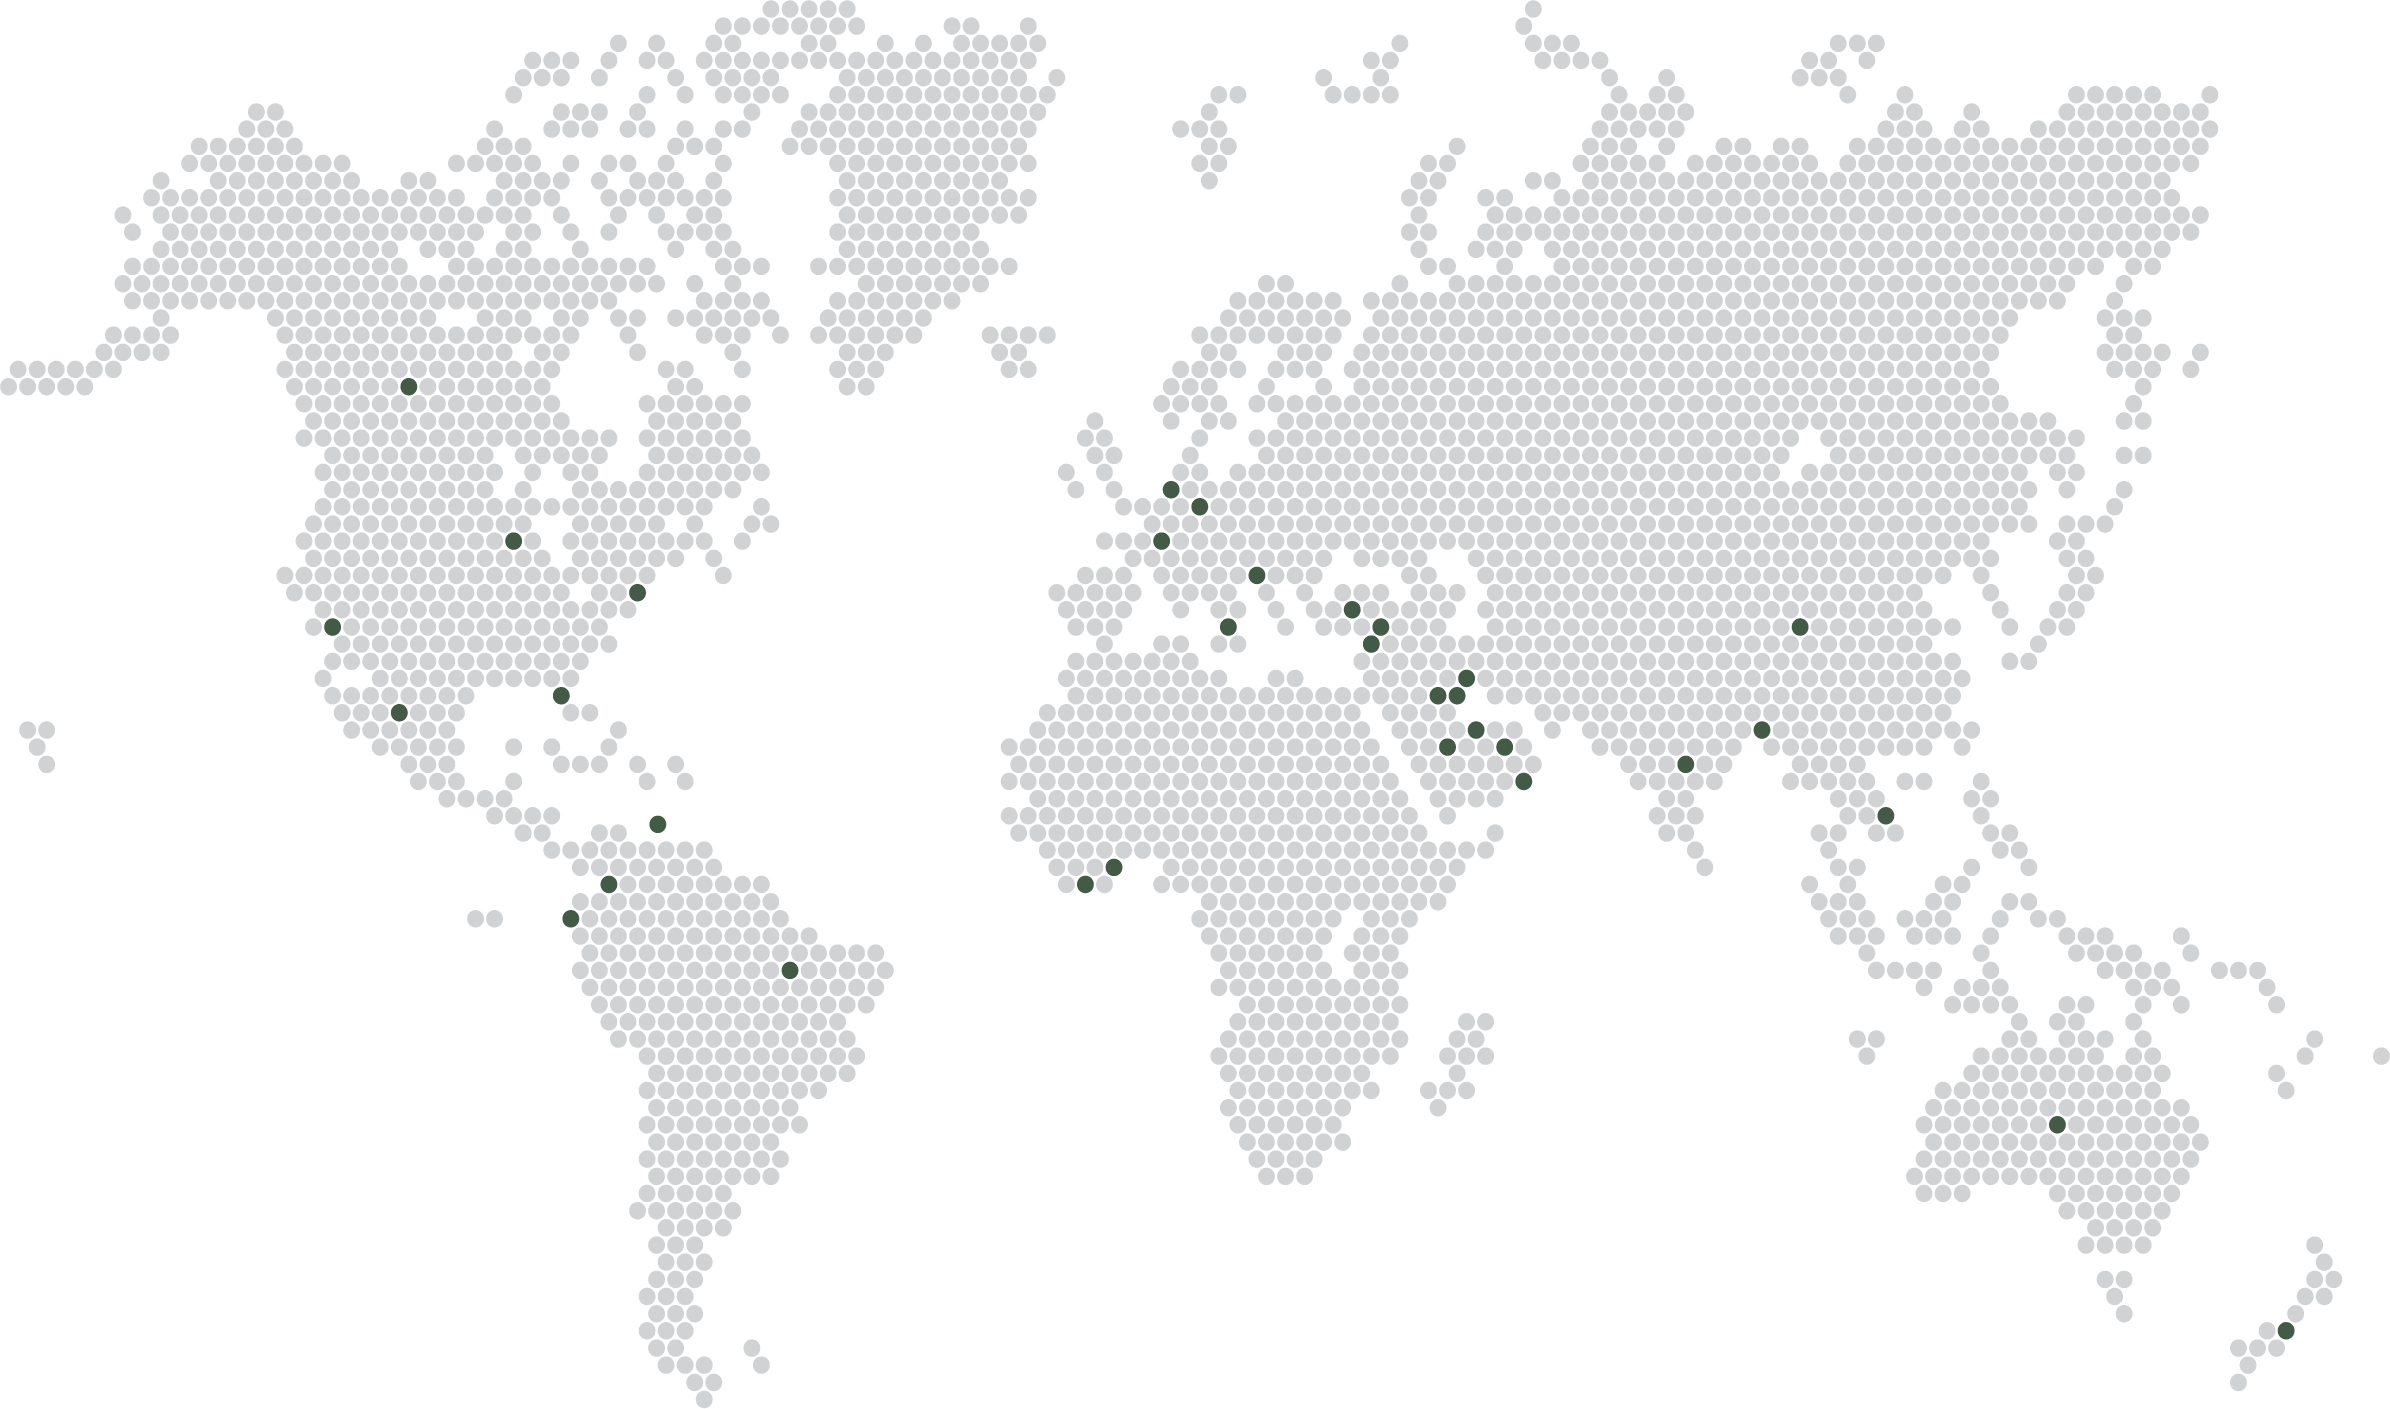 A world map showing Procurall's network in North America, South America, Africa, Europe, Asia, and Austrailia